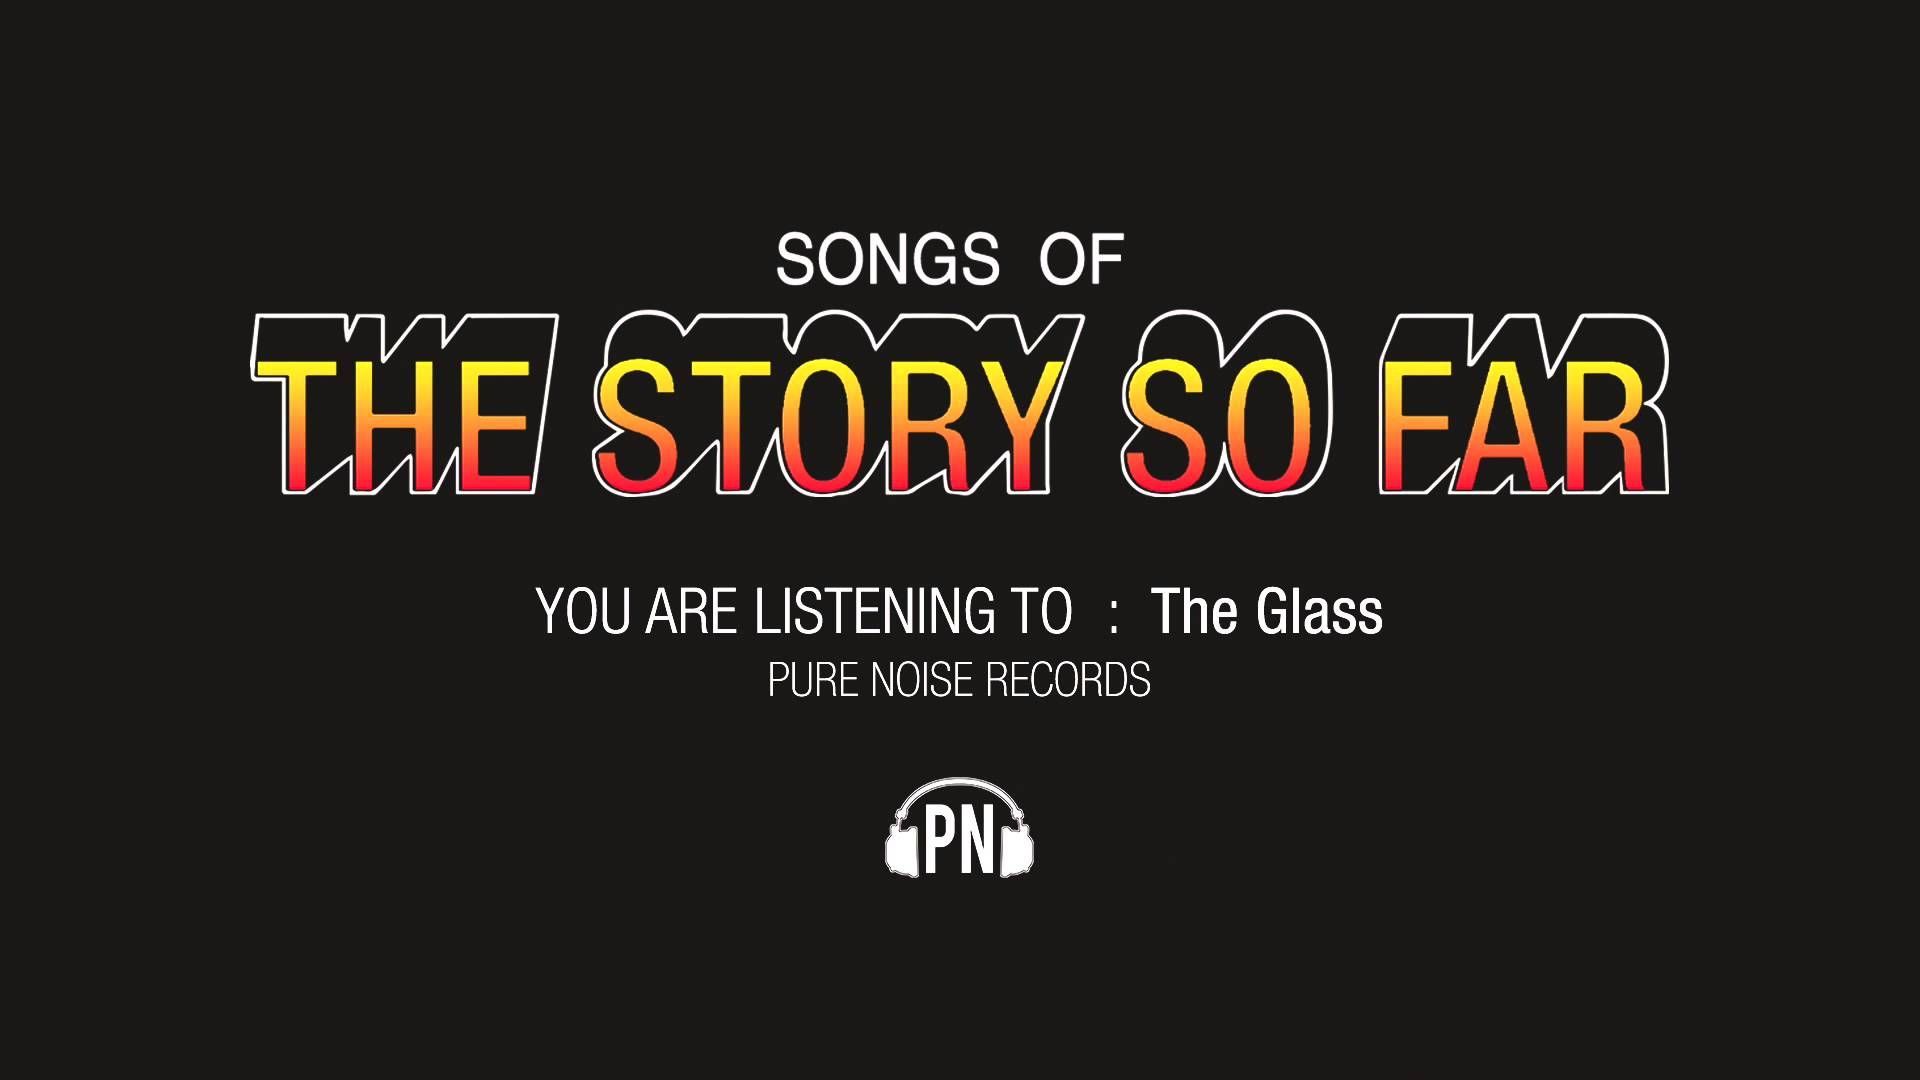 The Story So Far The Glass. Words, Stories, Songs